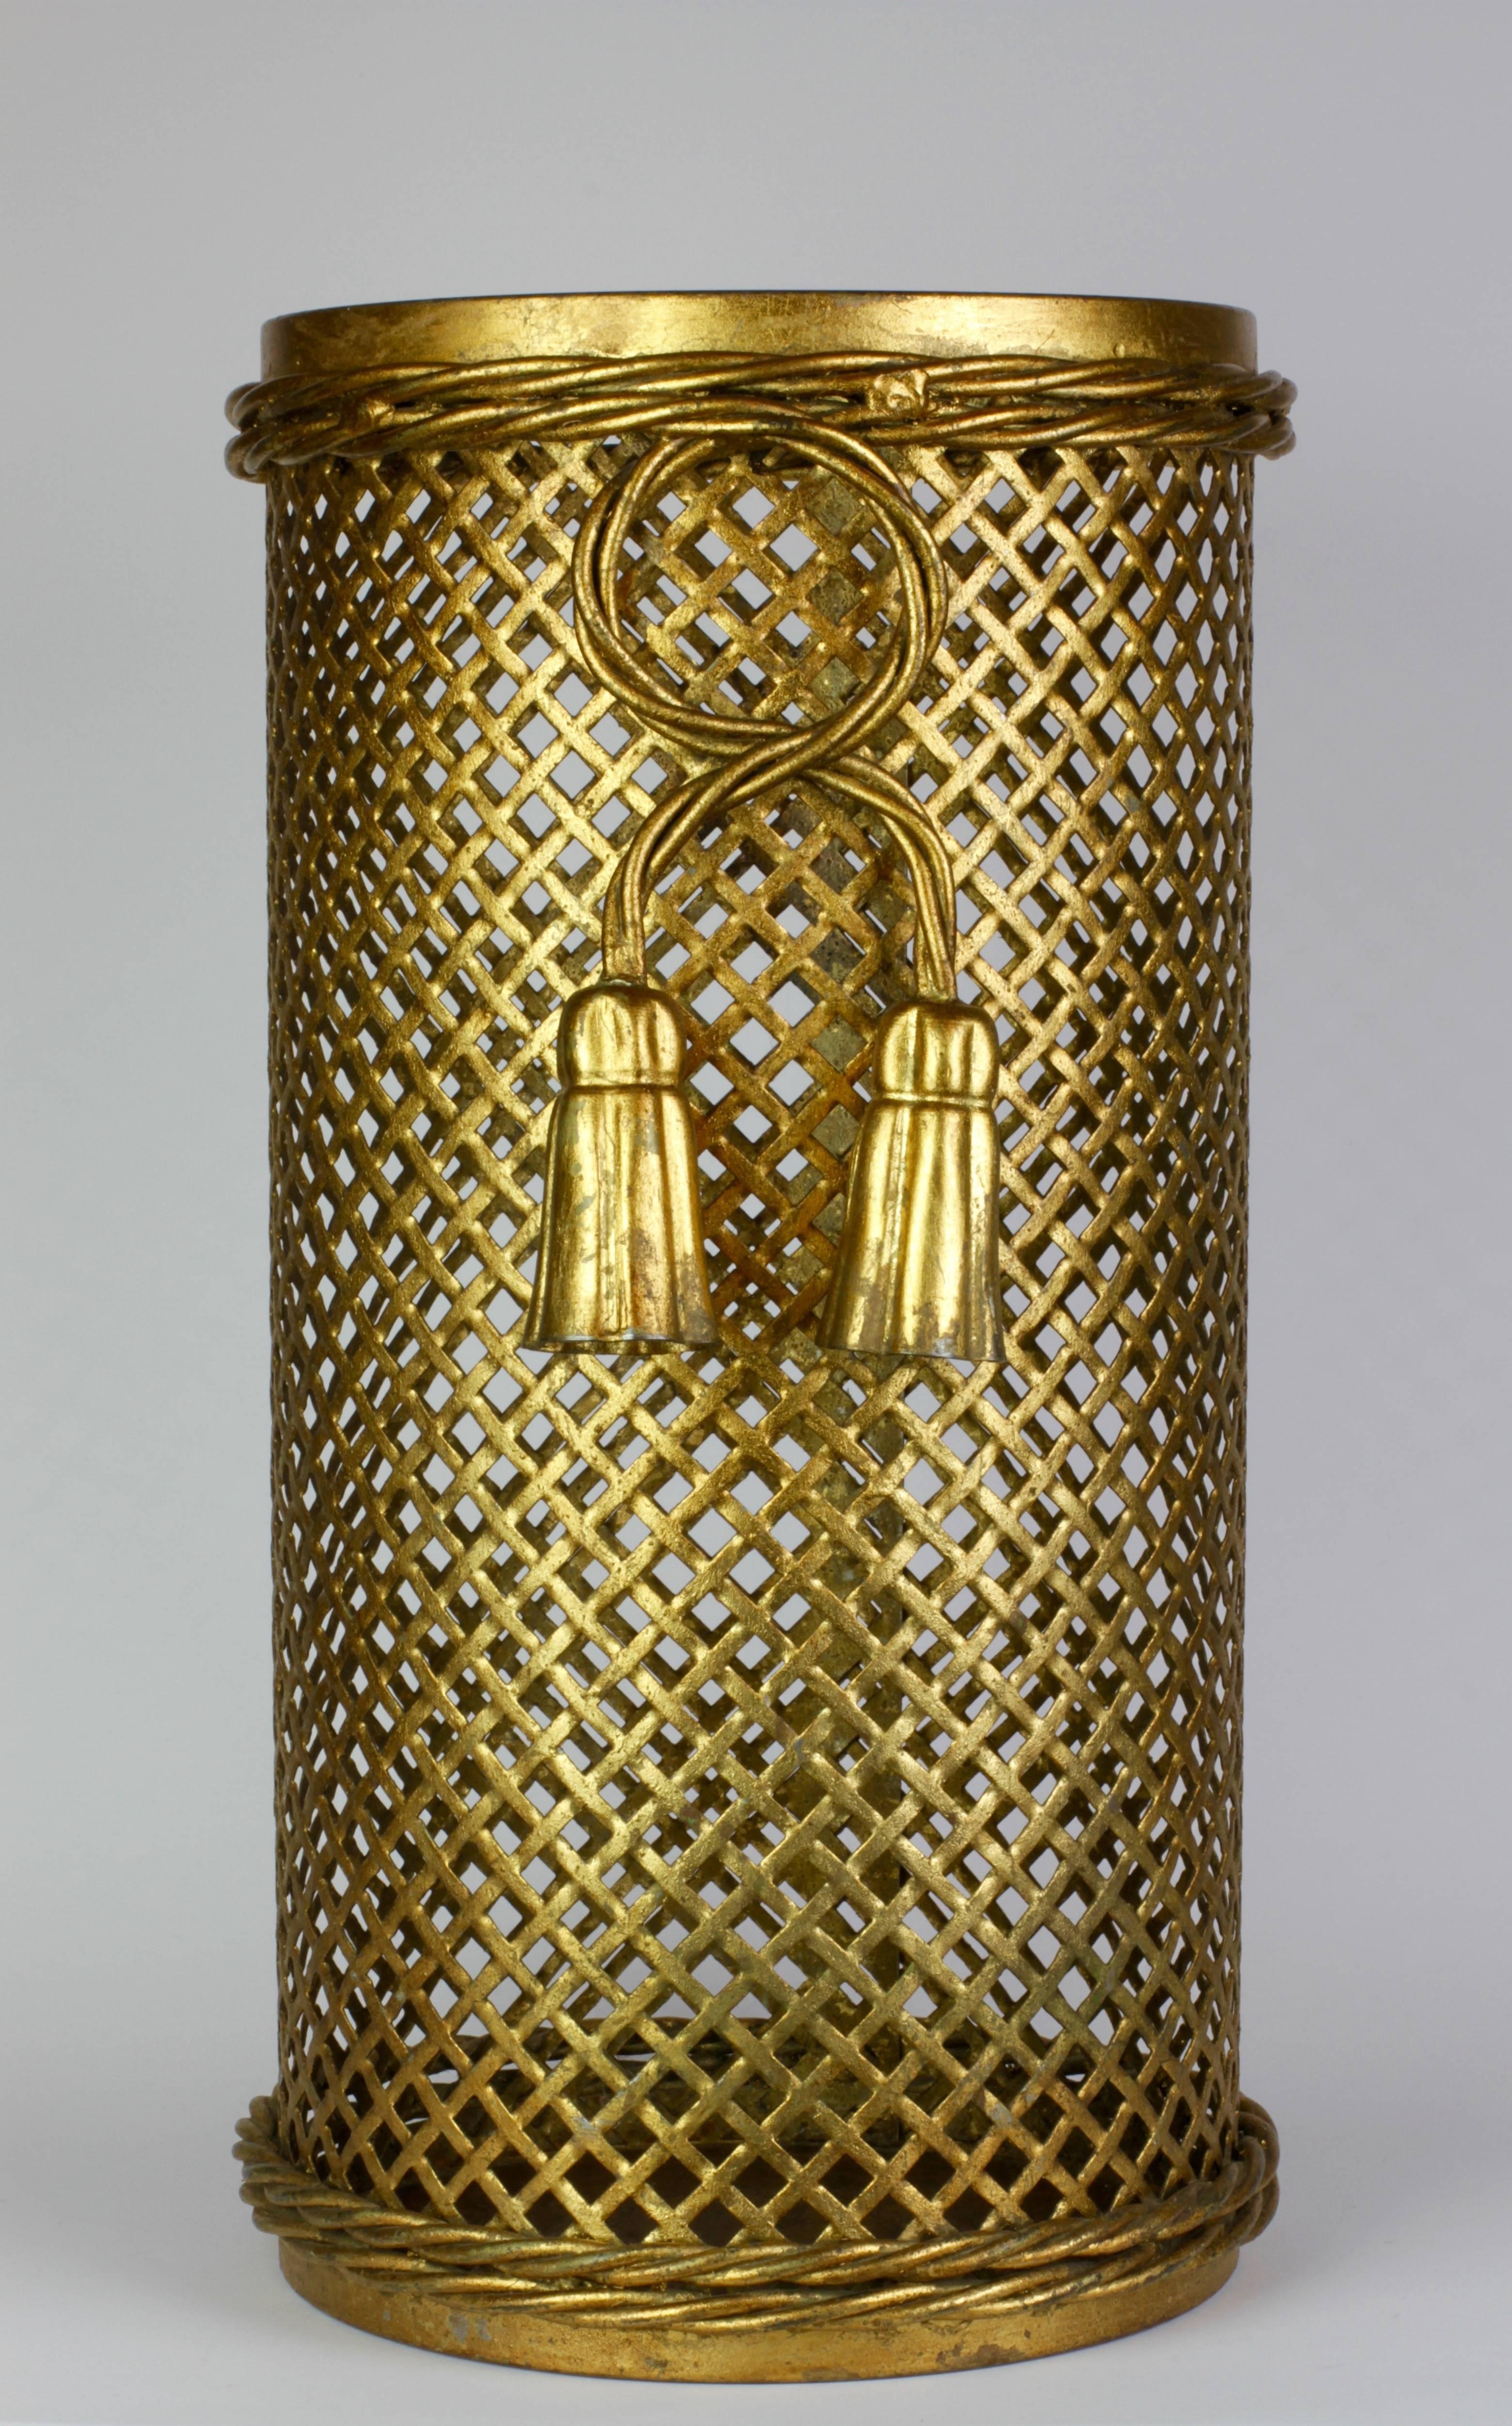 Stunning Mid-Century gold, gilt or gilded Hollywood Regency style umbrella stand or holder made in Florence, Italy, circa 1950 by Li Puma Firenze. The perforated lattice patterned metalwork with bent rope and tassel details finishes the piece